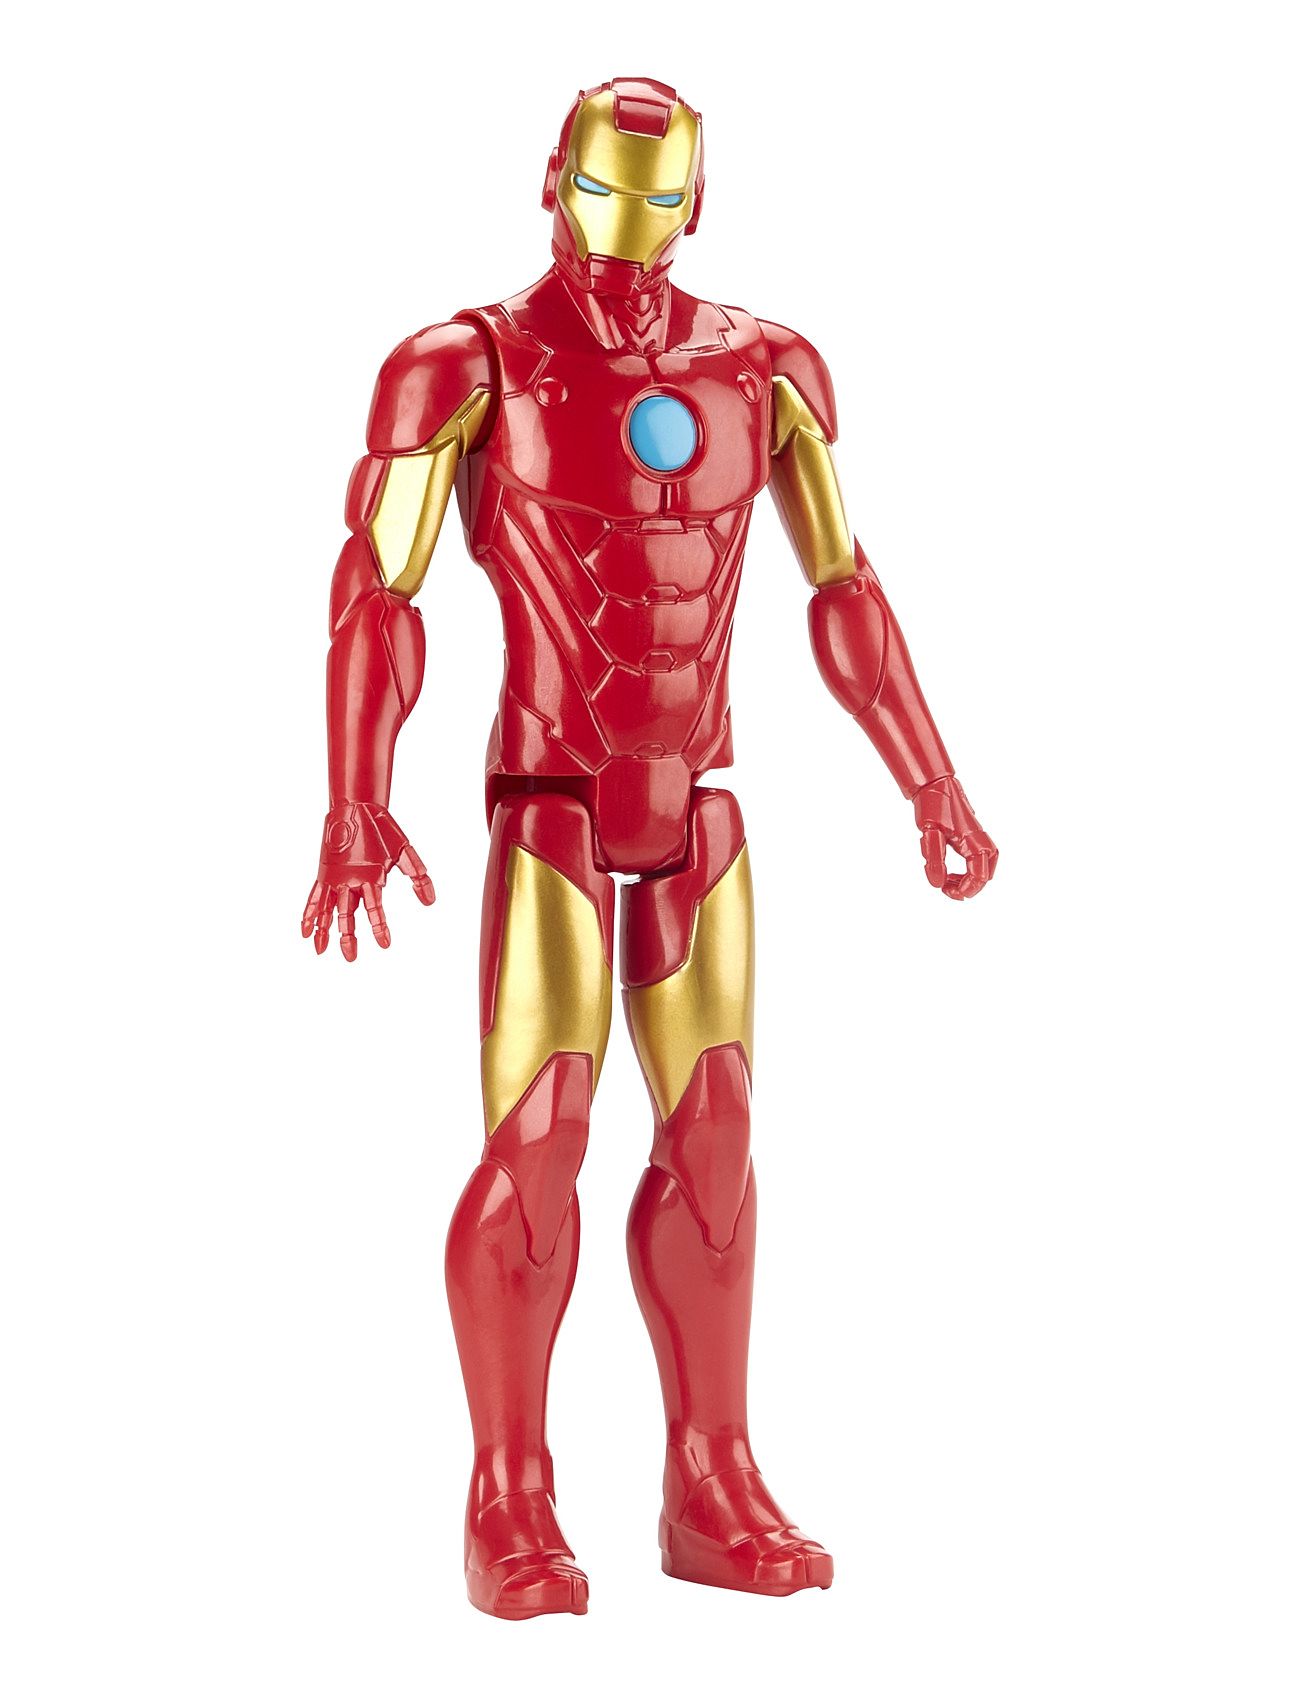 Marvel Avengers Titan Hero Iron Man Toys Playsets & Action Figures Action Figures Multi/patterned Marvel